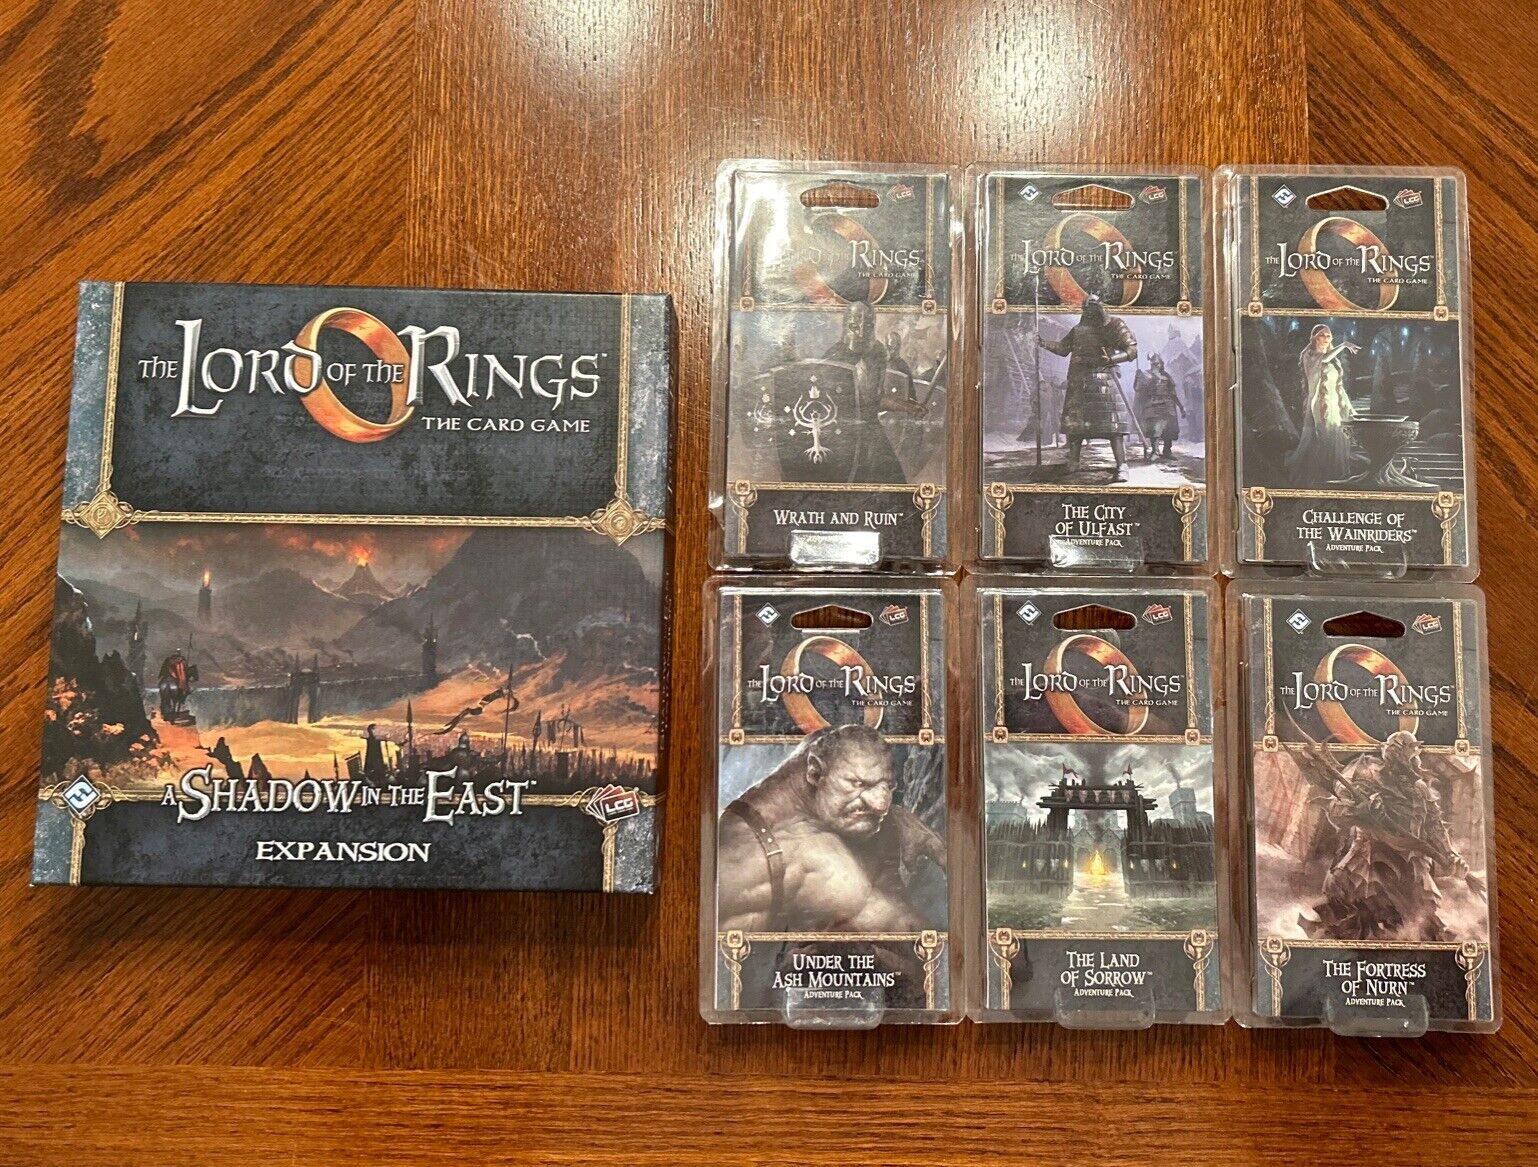 The Vengeance of Mordor Cycle - A Shadow in the East - The Lord of the Rings LCG